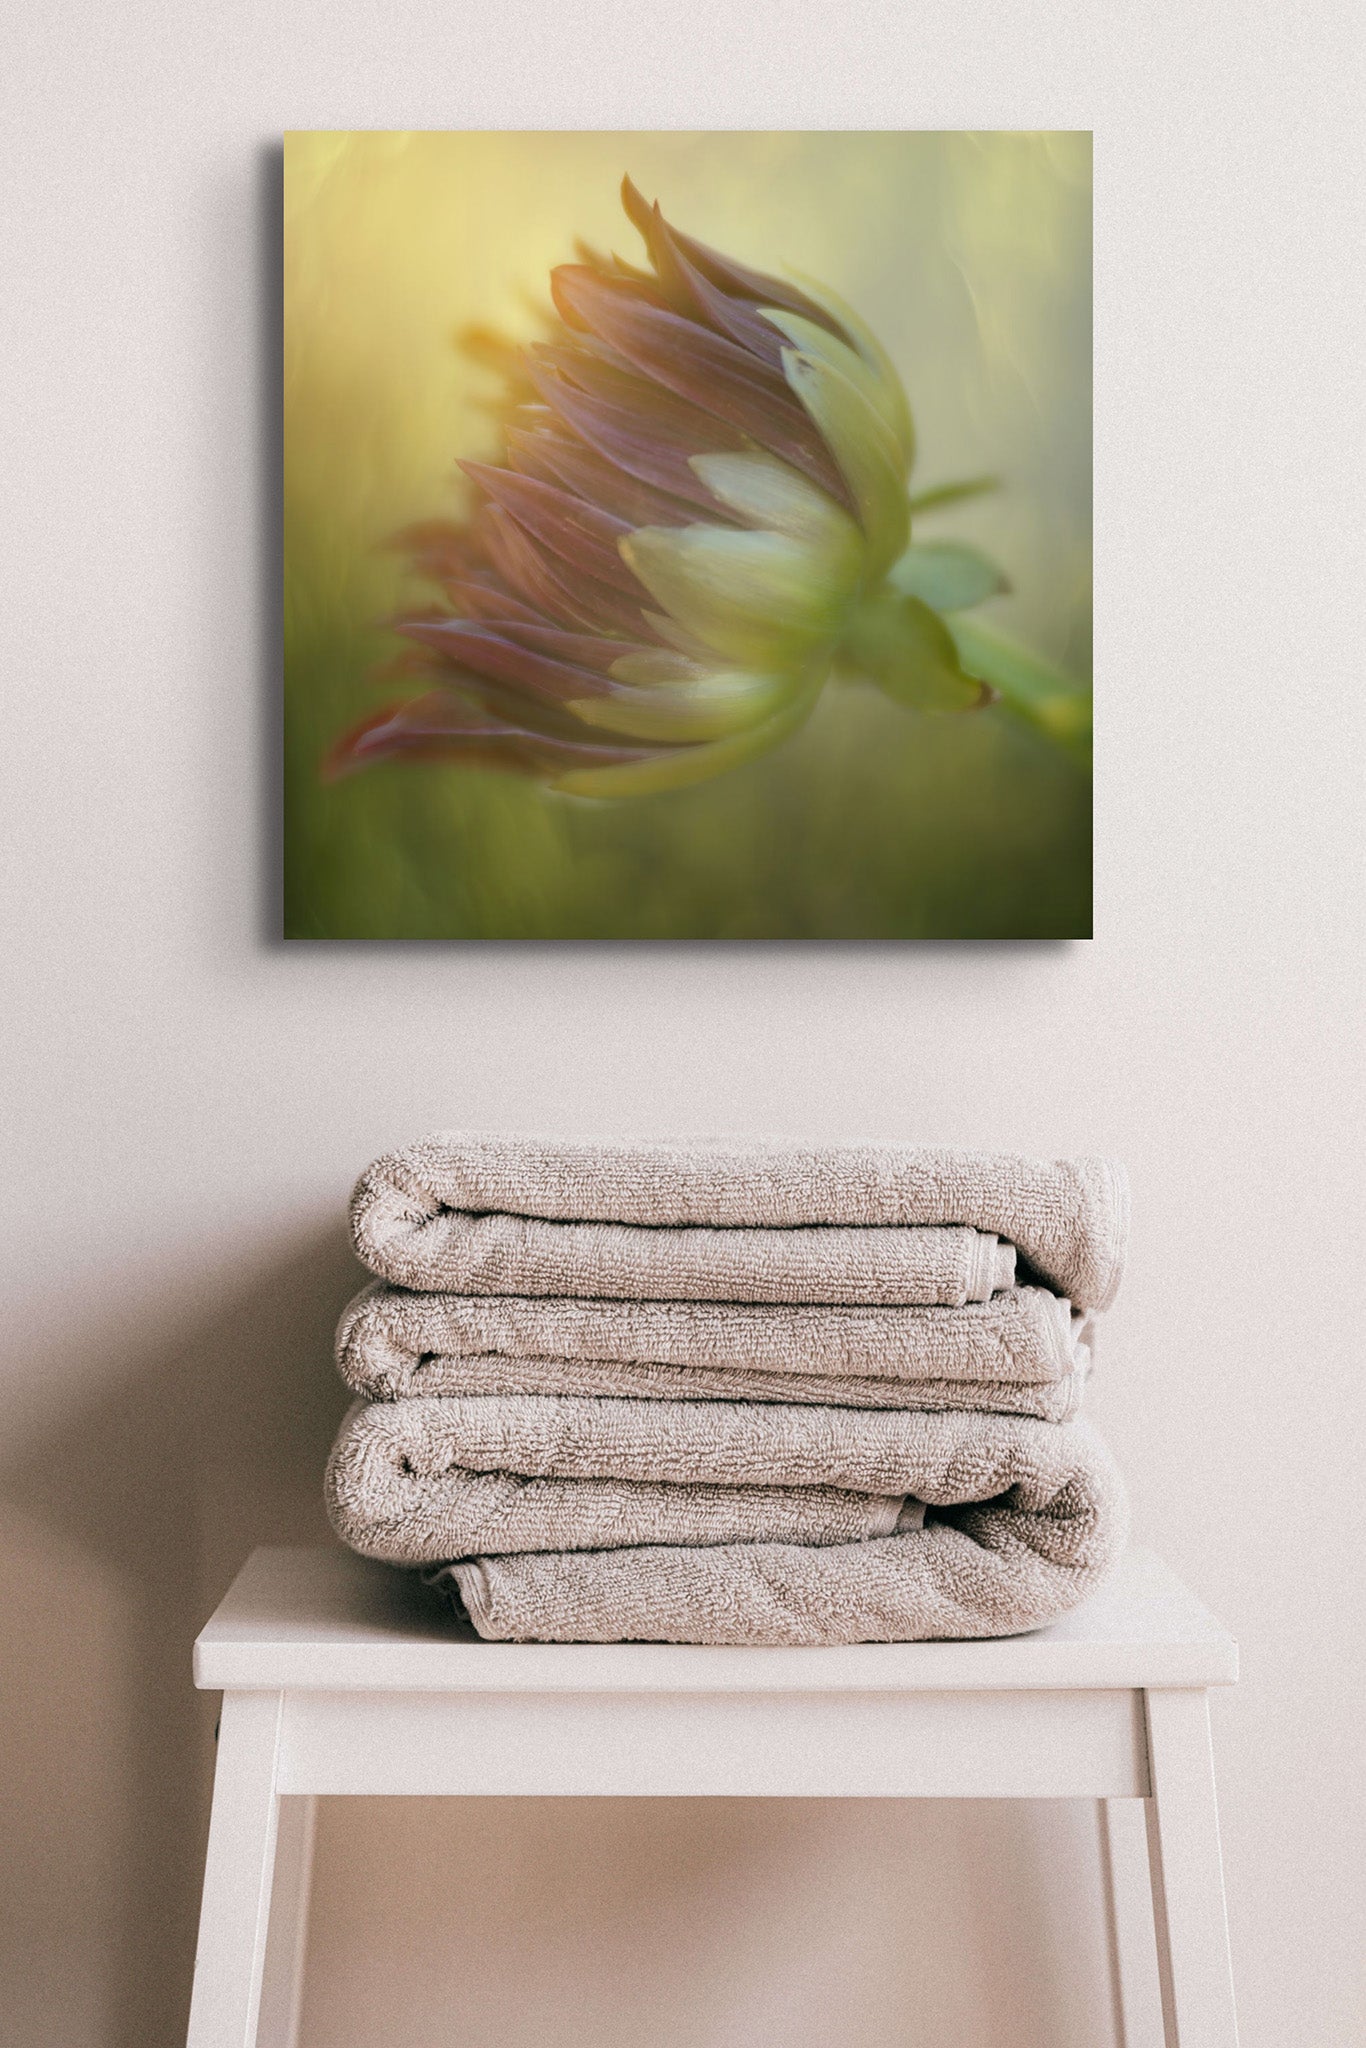 Picture hanging on the wall of a bathroom. There is a stack of towels on a stool. The picture is a fine art photograph of a Dahlia bud closed and in the sunlight. The photograph was taken by Cameron Dreaux. 